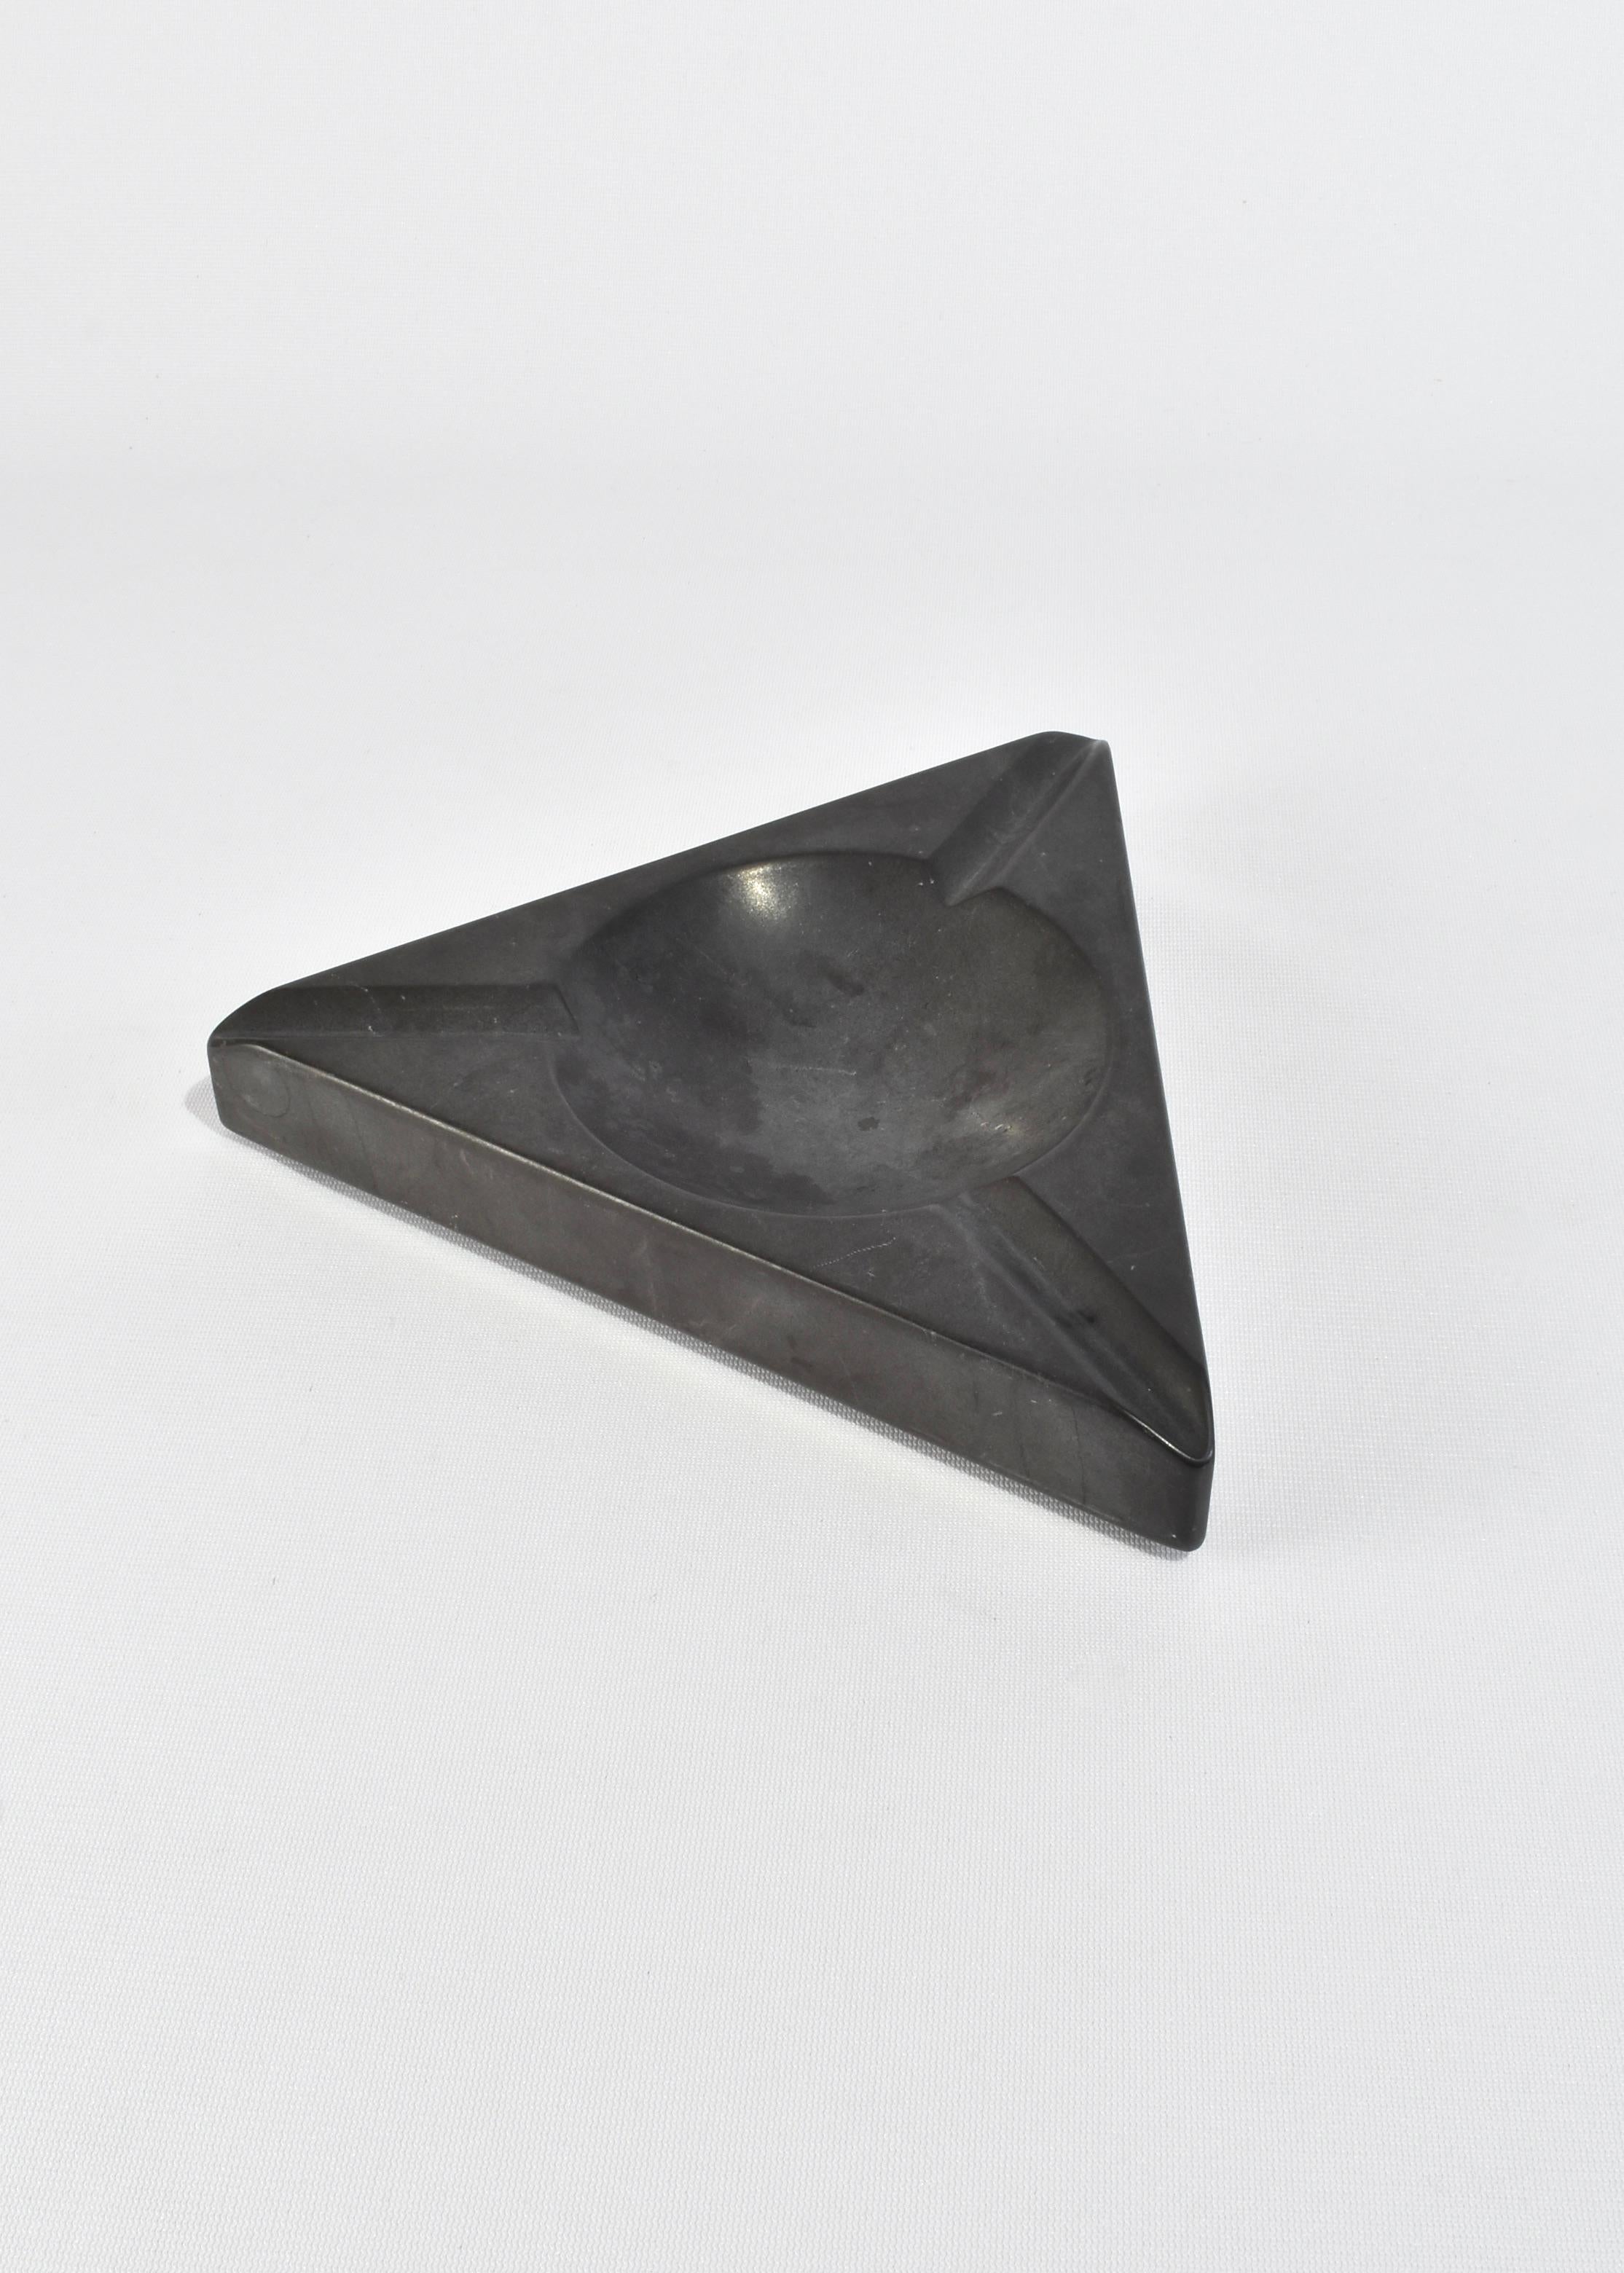 Vintage carved stone ashtray or catchall in a triangle shape. Perfect for jewelry keeping, part of a table scape or a catchall for small treasures.